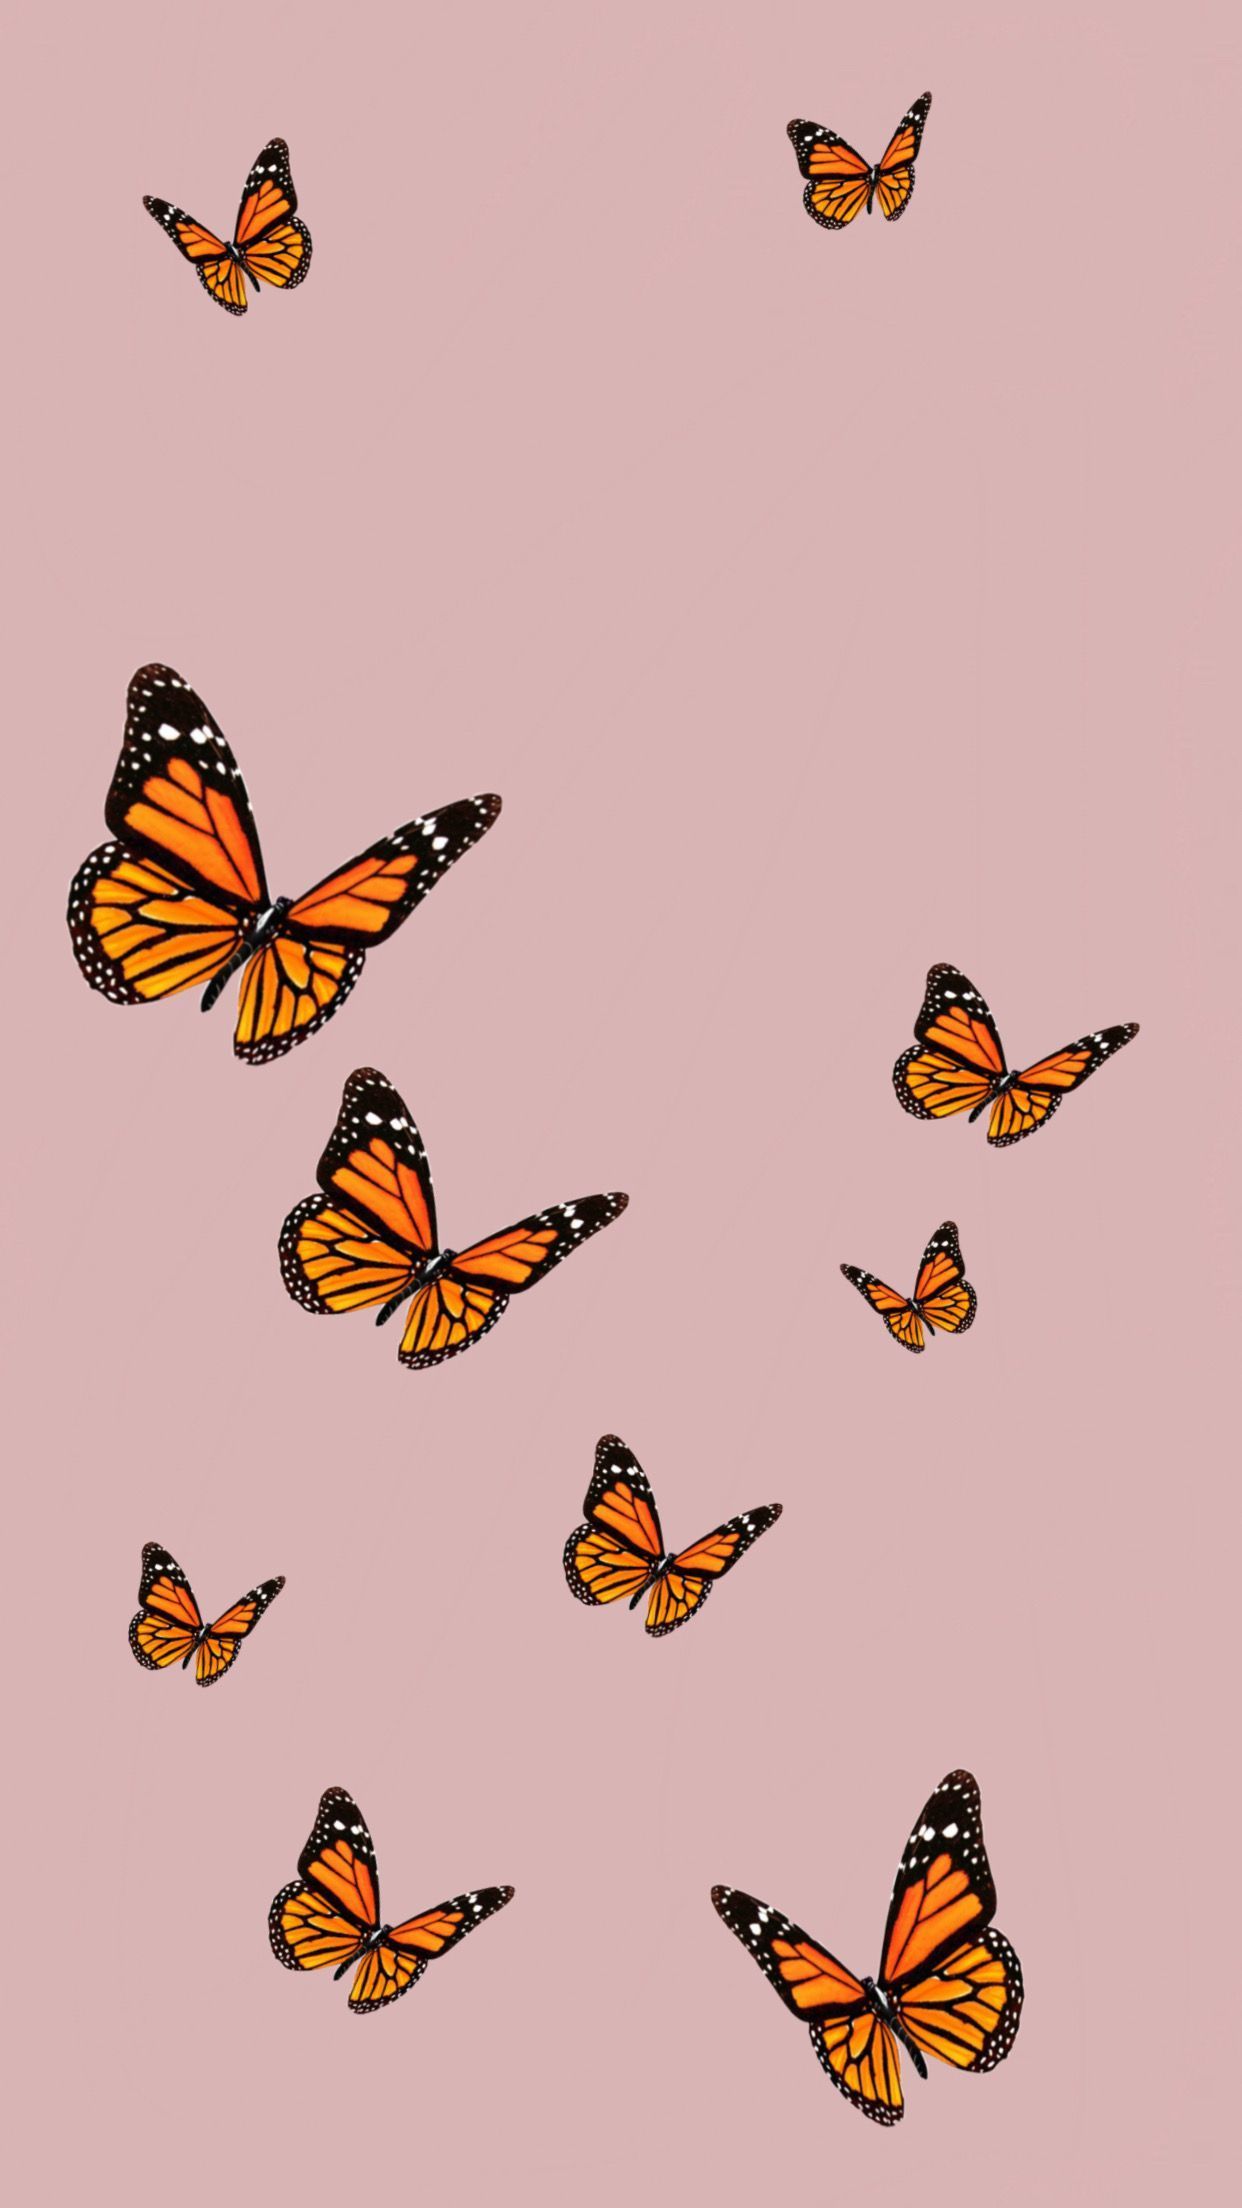 Butterfly Aesthetic Wallpapers - Wallpaper Cave